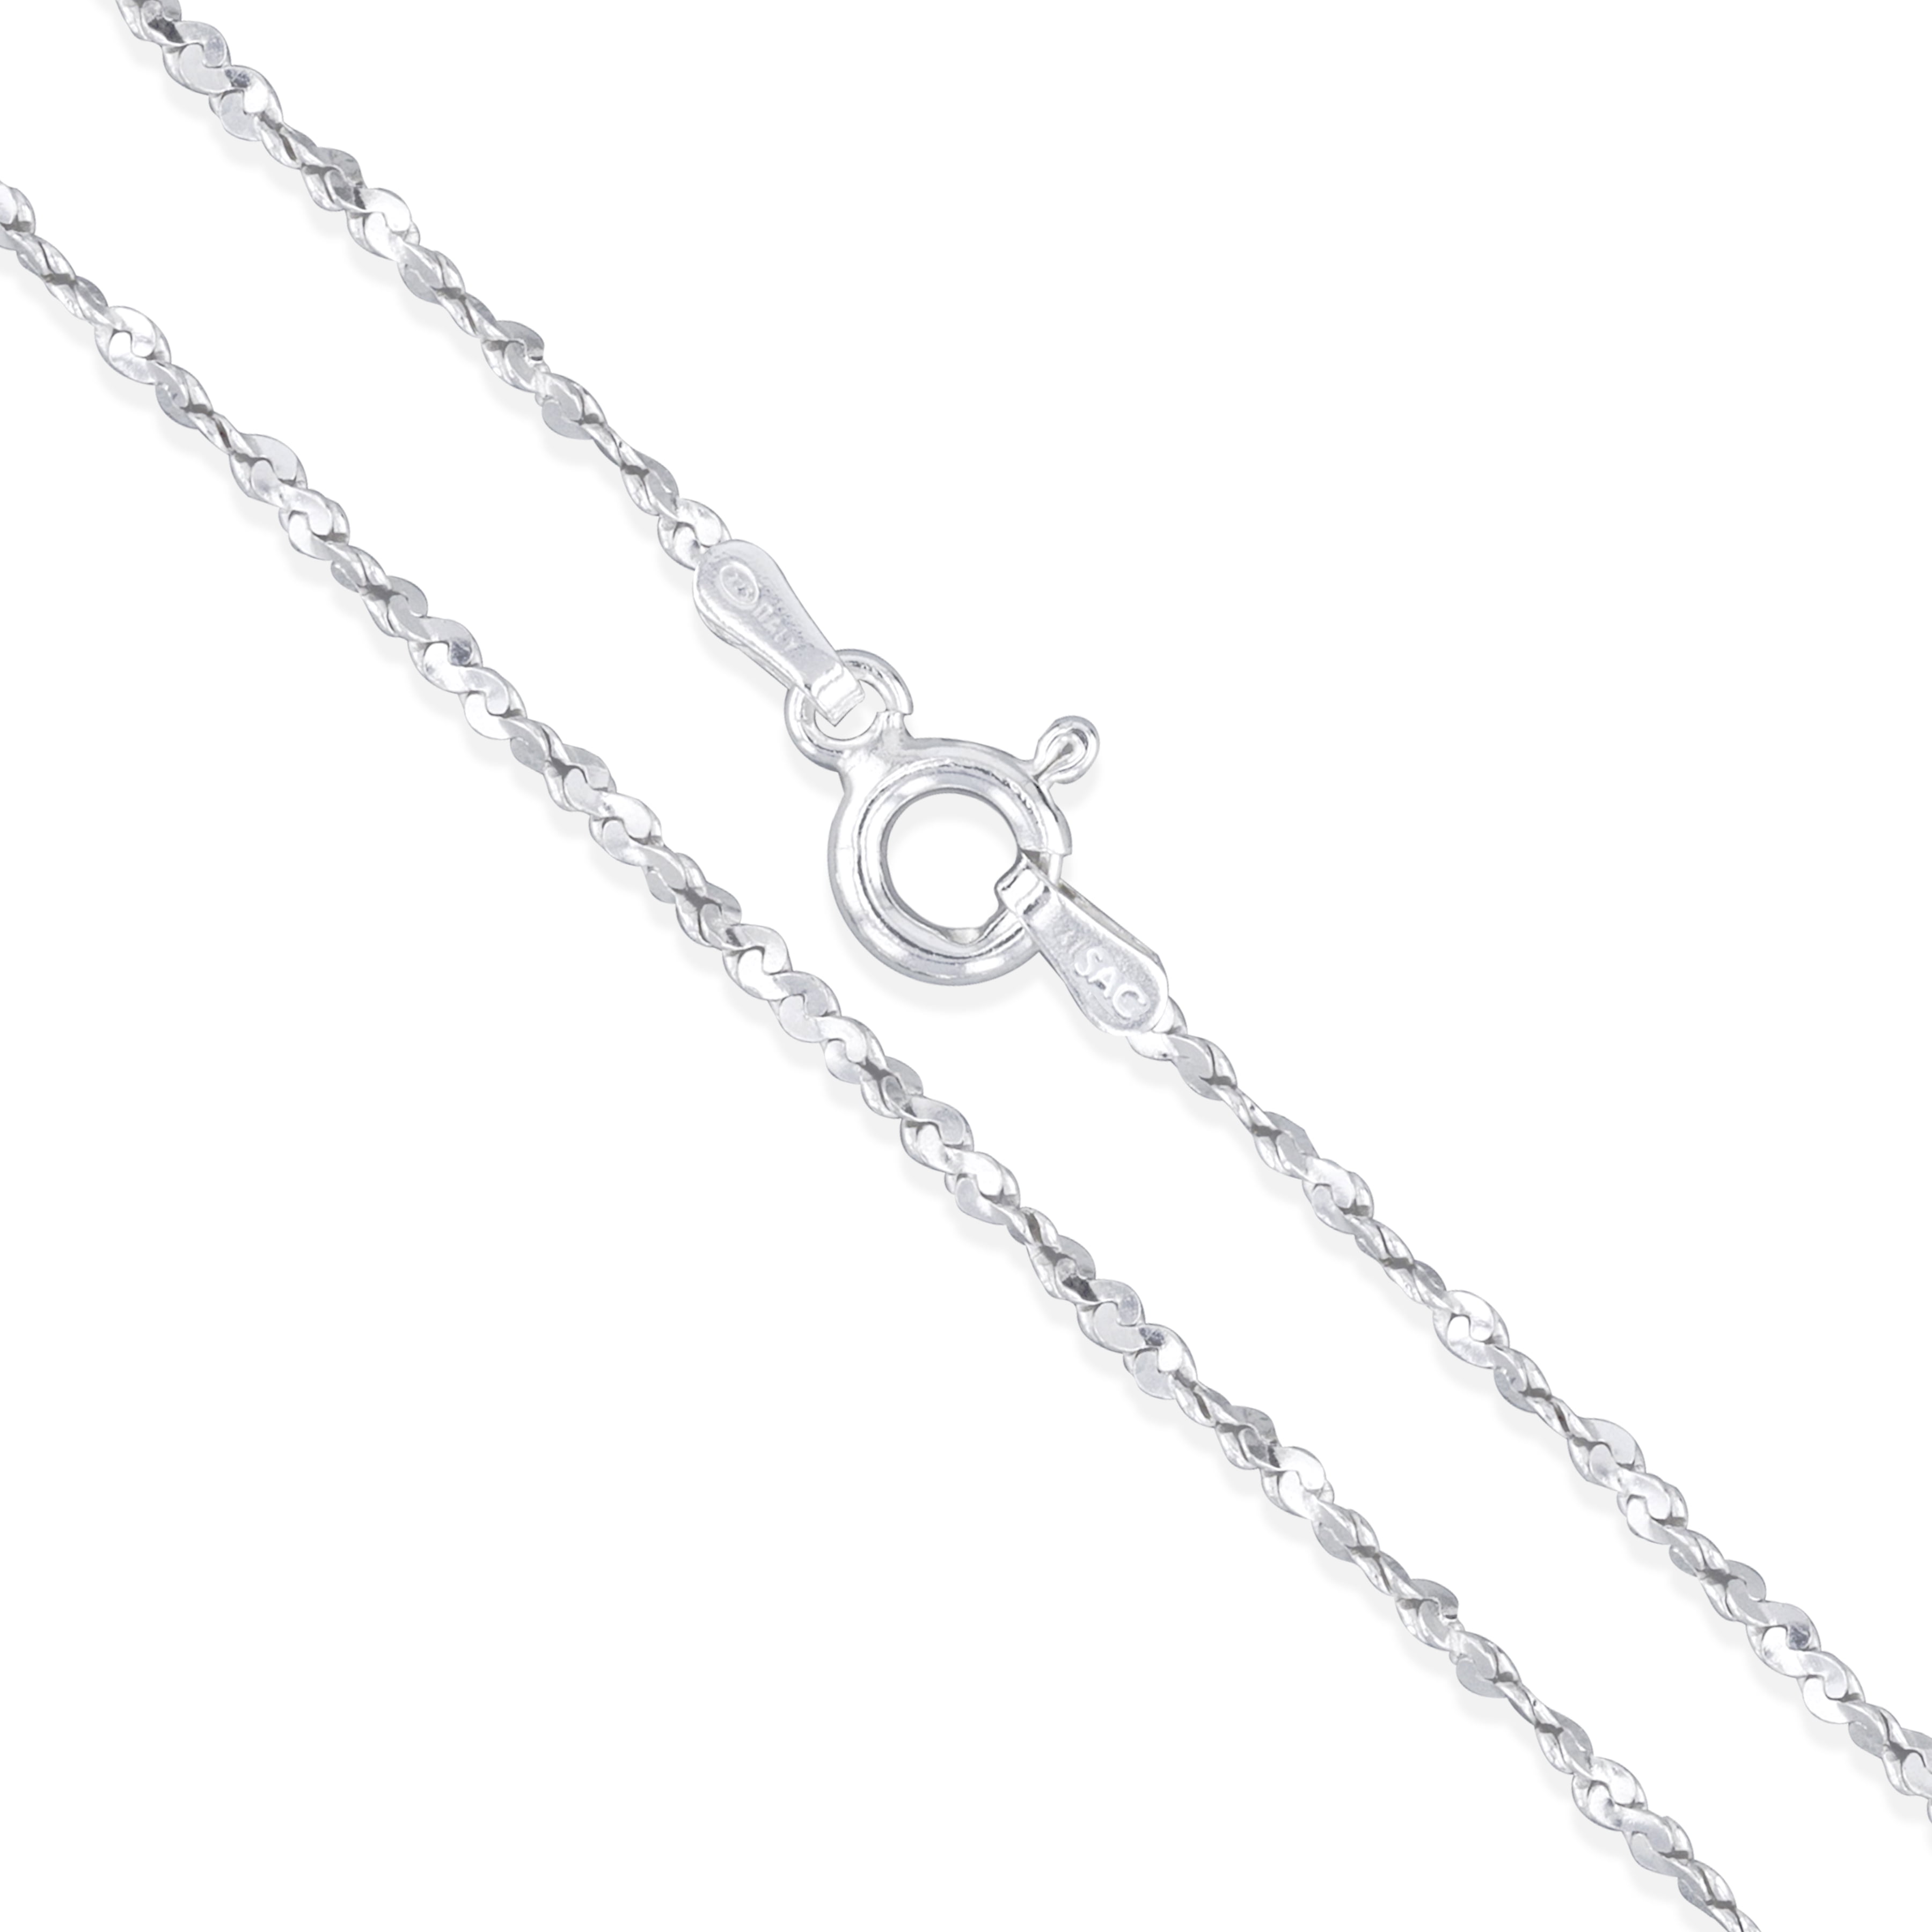 40 cm 1.5 mm L New 60 14K Solid White Gold Rope Chain 3.1 Grams W 16 inches